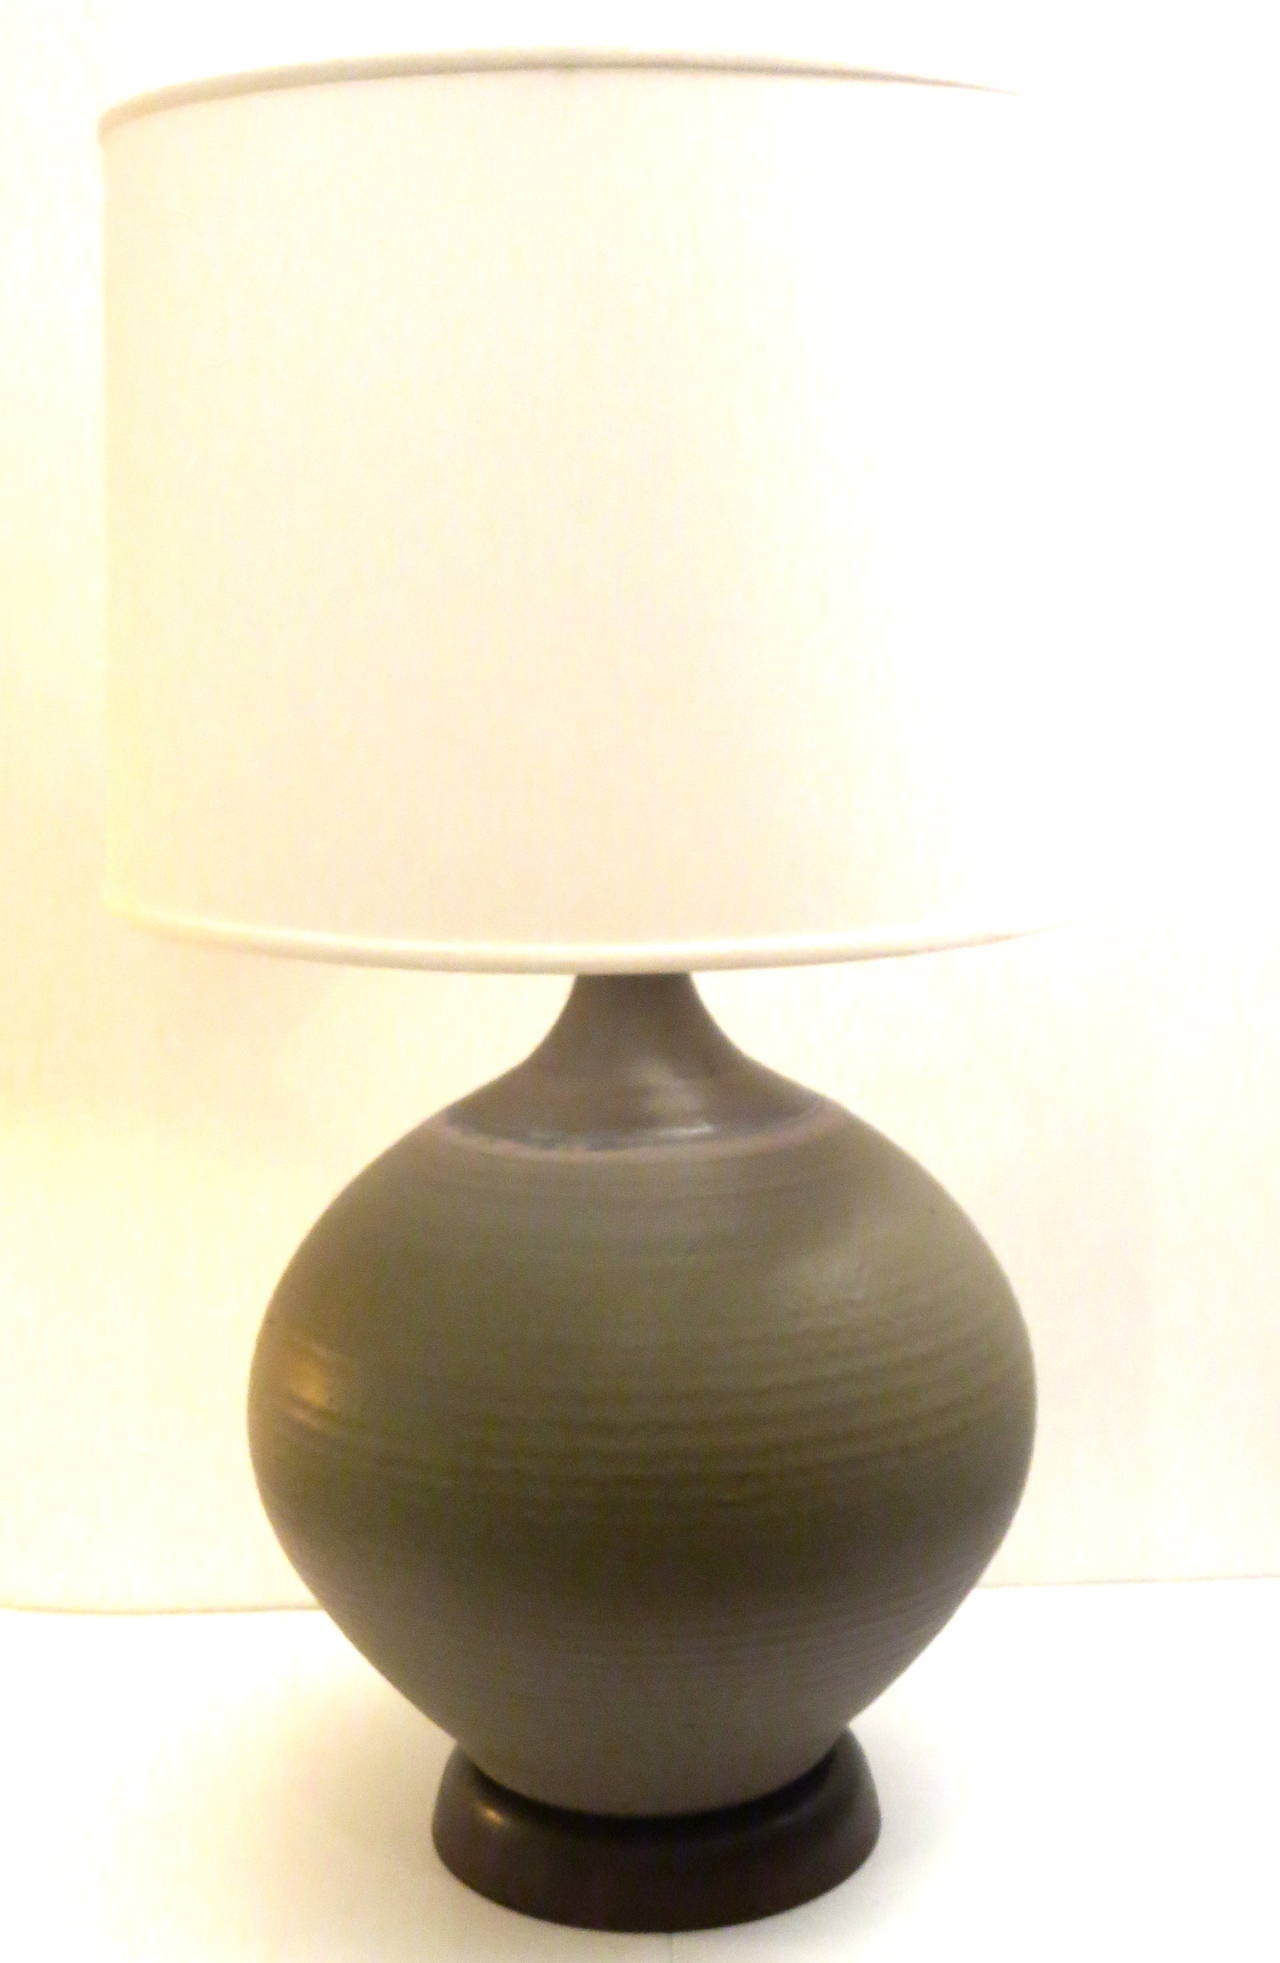 Monumental large Table lamp in glazed stoneware,olive green and earth tones finish,great condition no chips or cracks rewired, hand-thrown atributed to Bob Kinzie for Raul Coronel and Stoneware Designs West, California, circa1960s . 36